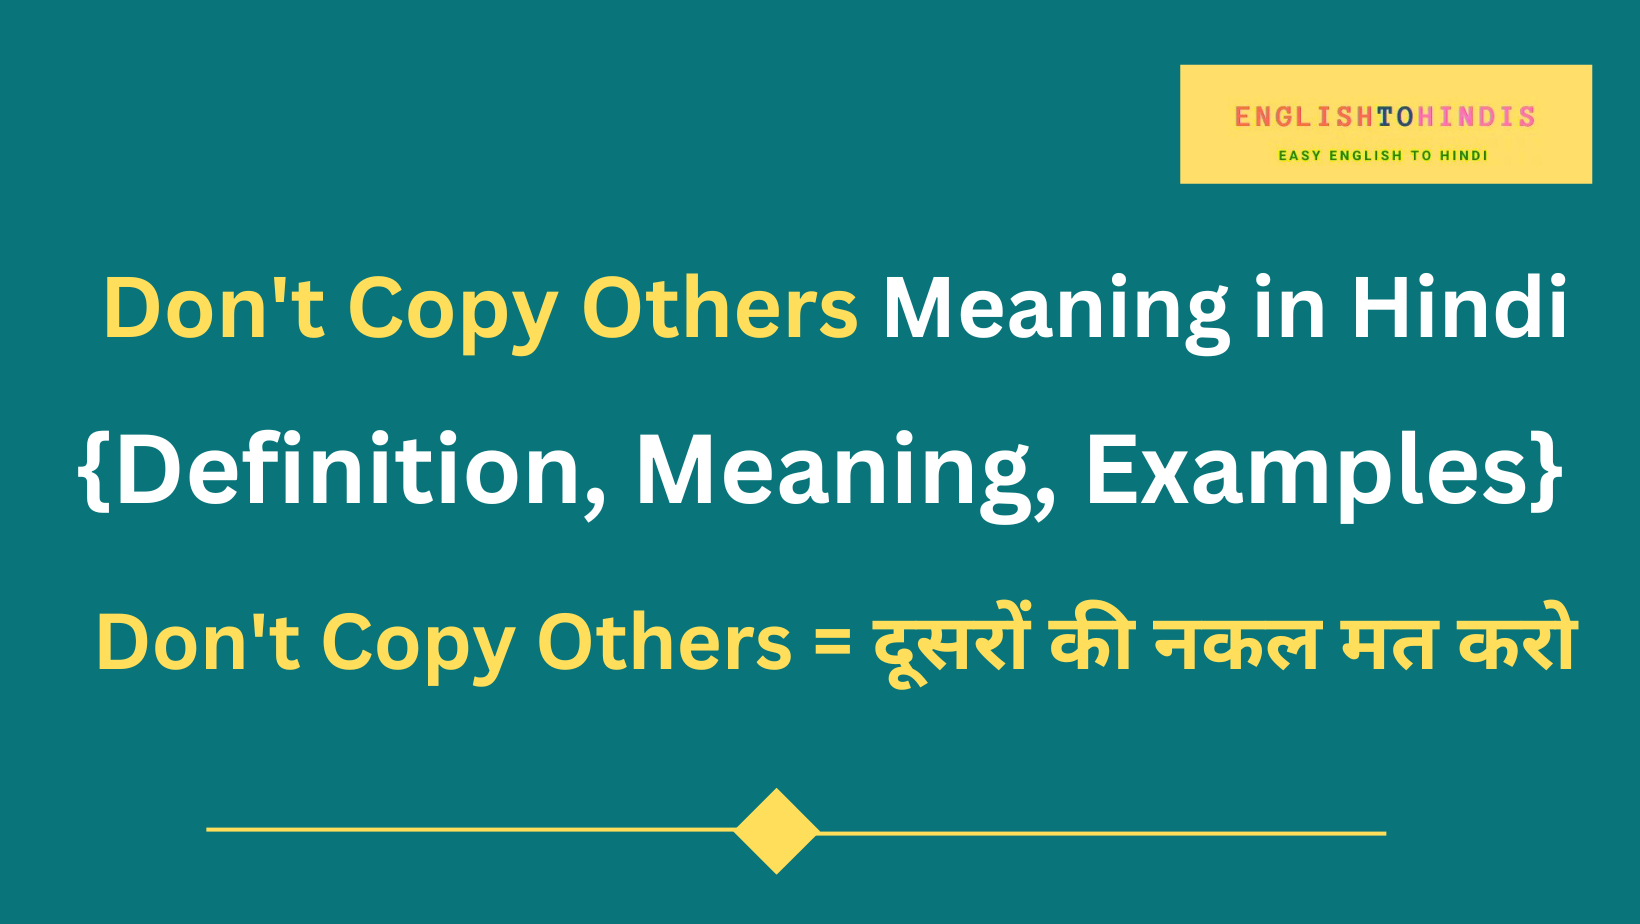 Don't Copy Others Meaning in Hindi